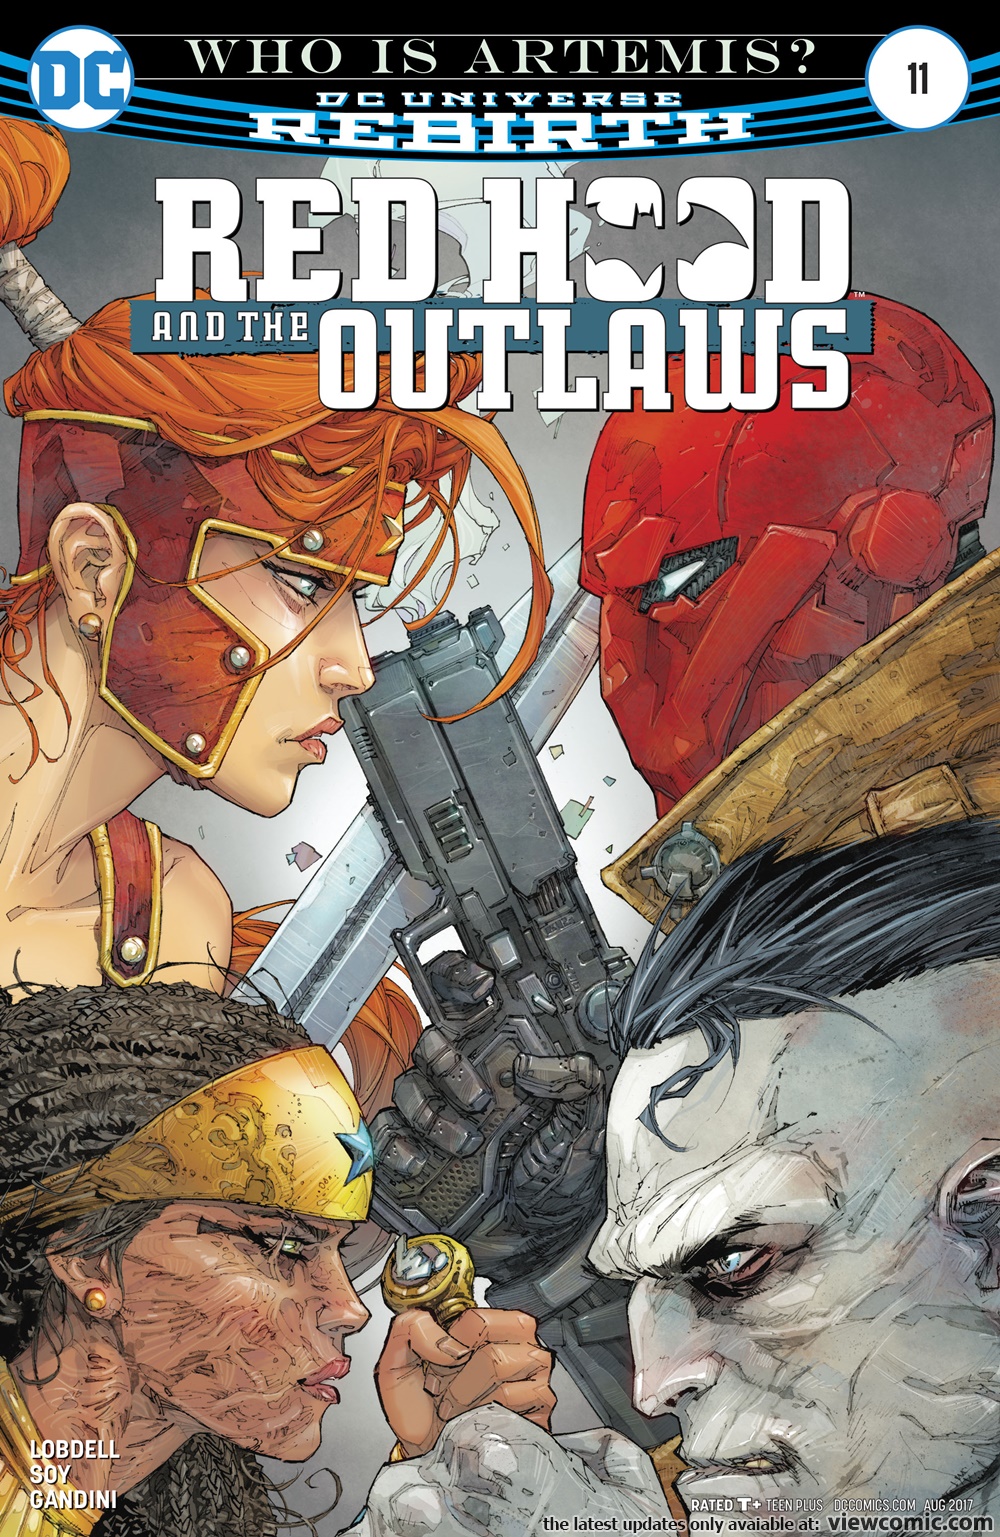 Red Hood And The Outlaws V2 011 2017 | Read Red Hood And The Outlaws V2 011 comic online in high quality. Read Full Comic online for free Read comics online in high quality .